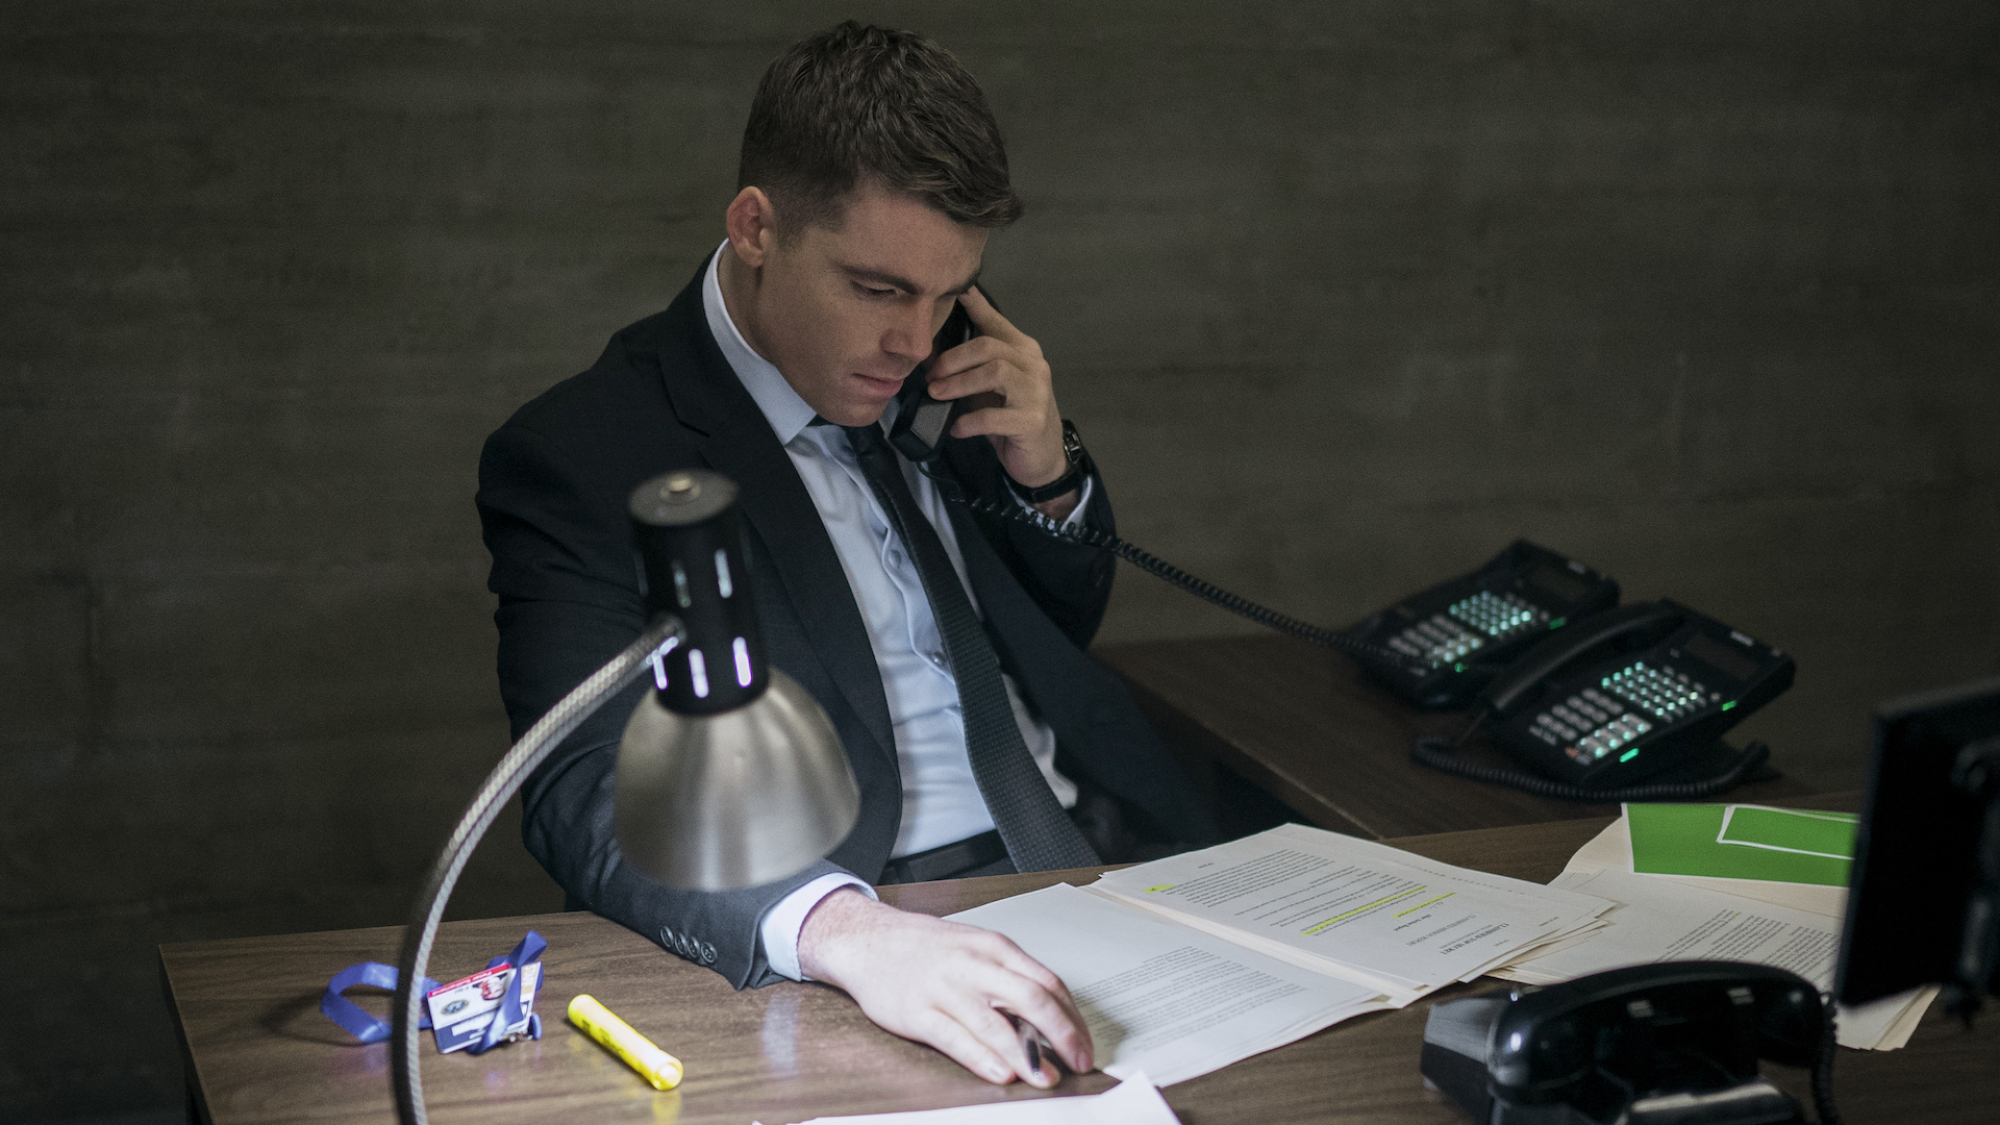 An FBI agent sits at a desk at night doing paperwork.